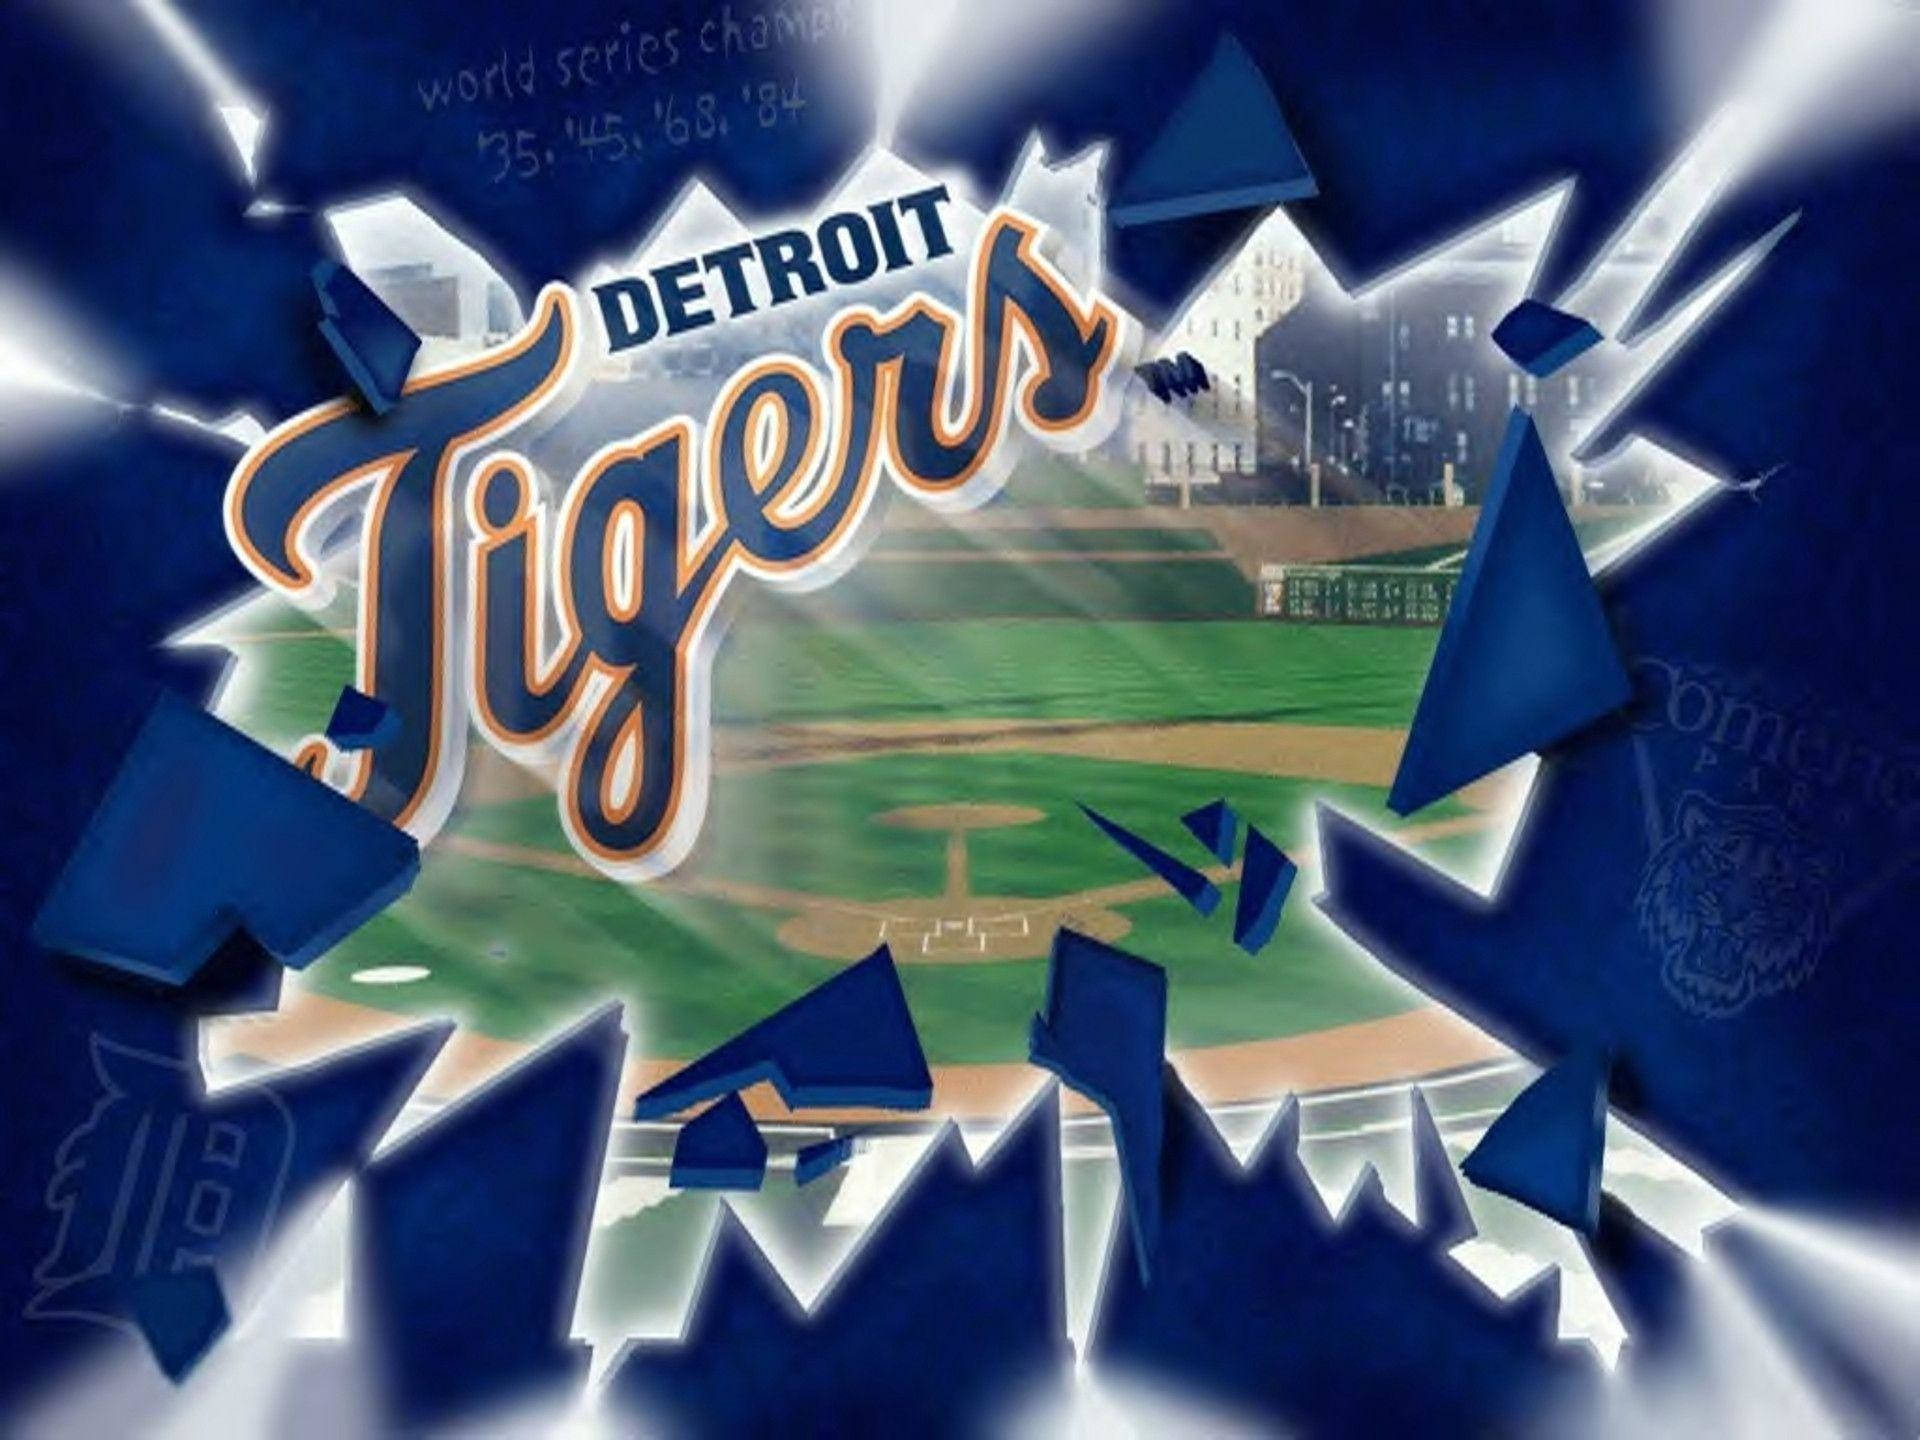 1920X1440 Detroit Tigers Wallpaper and Background